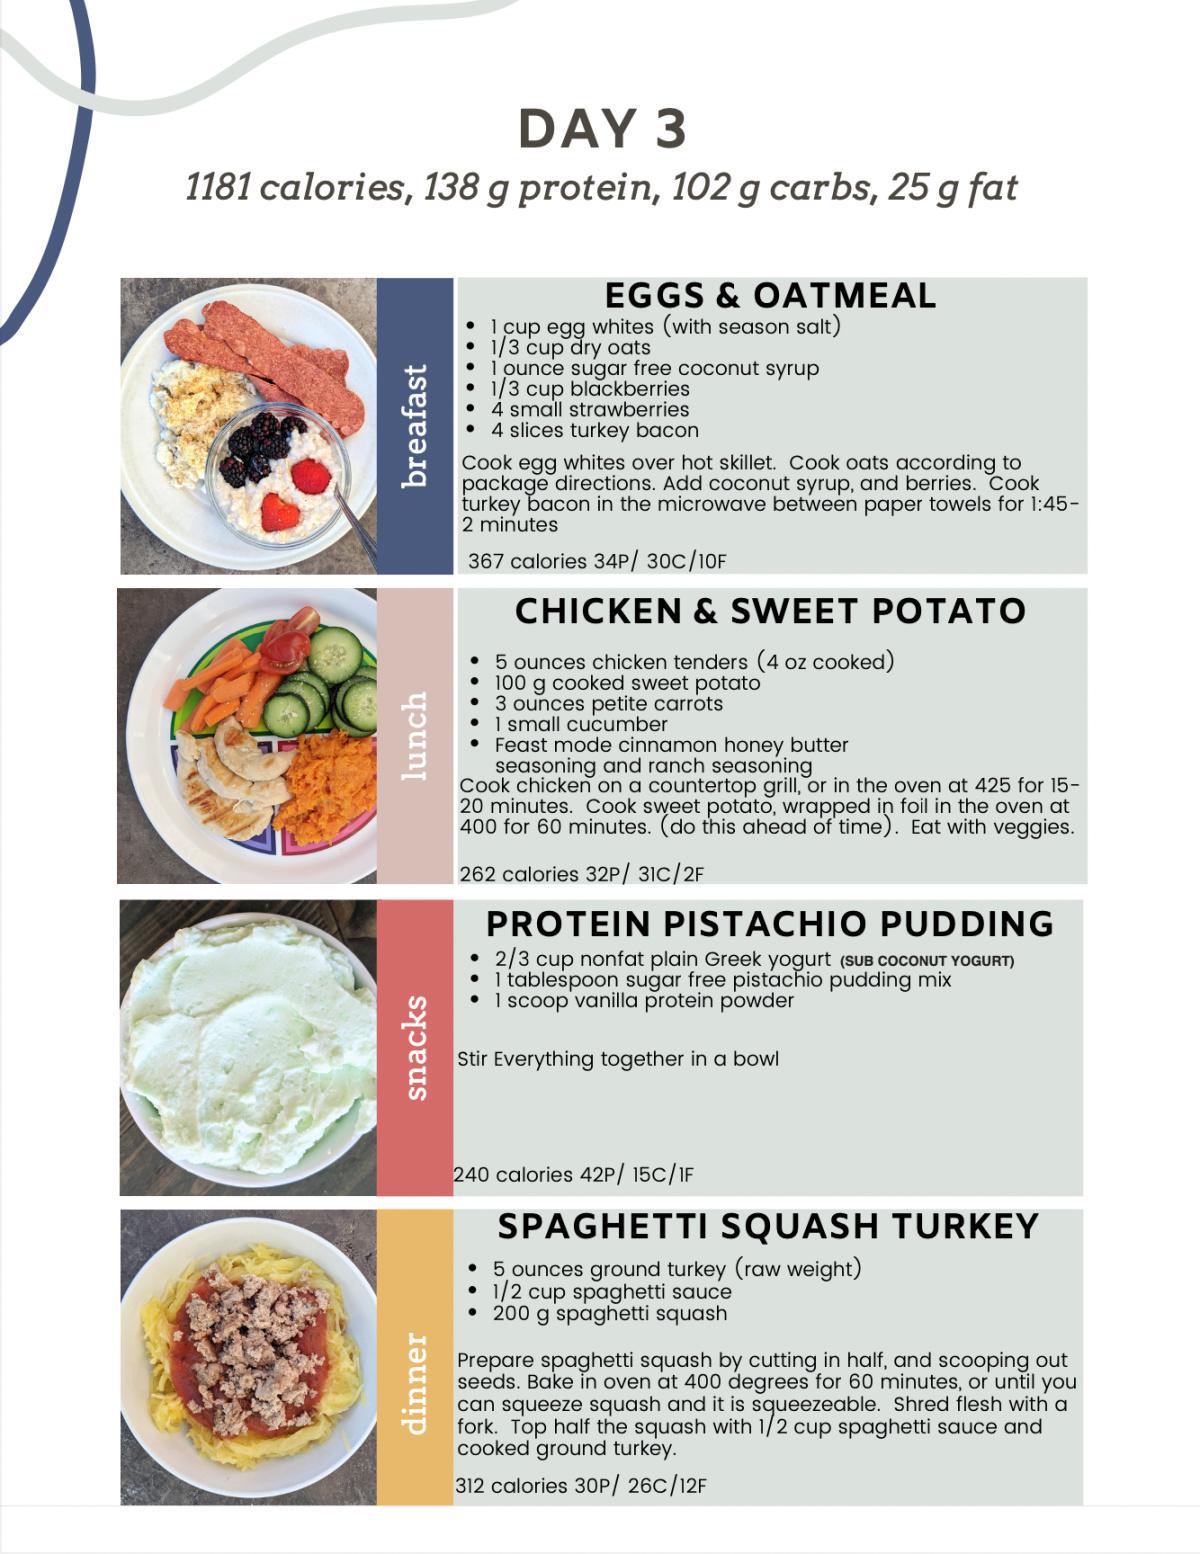 MEAL PLAN WITH RECIPES